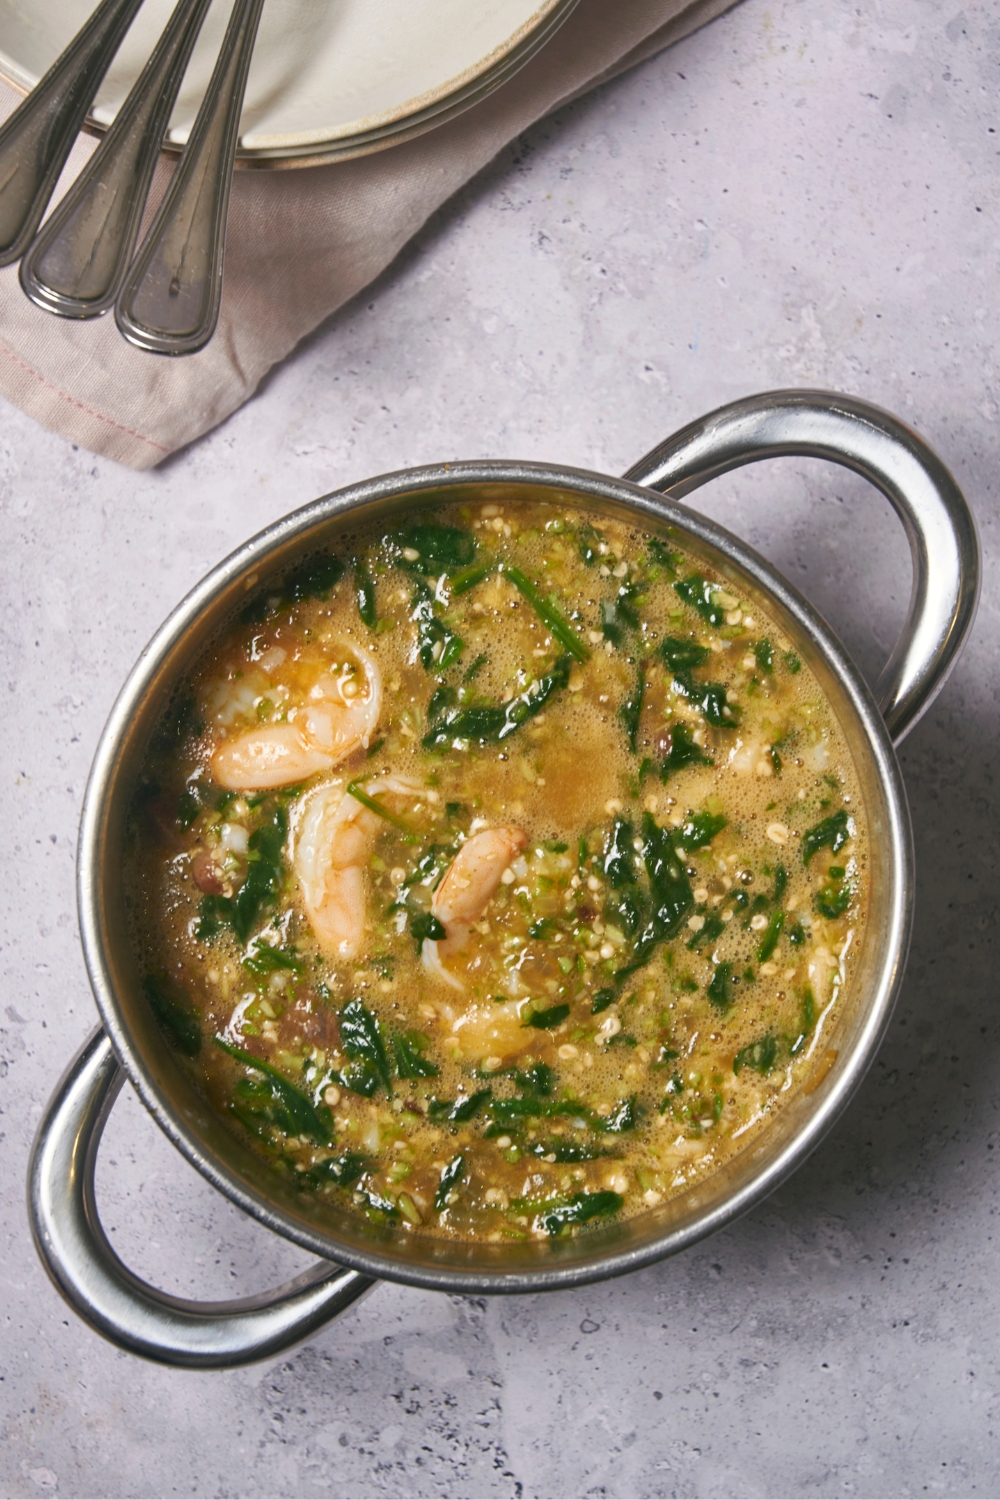 Shrimp, spinach, and ground okra in a pot of soup broth.